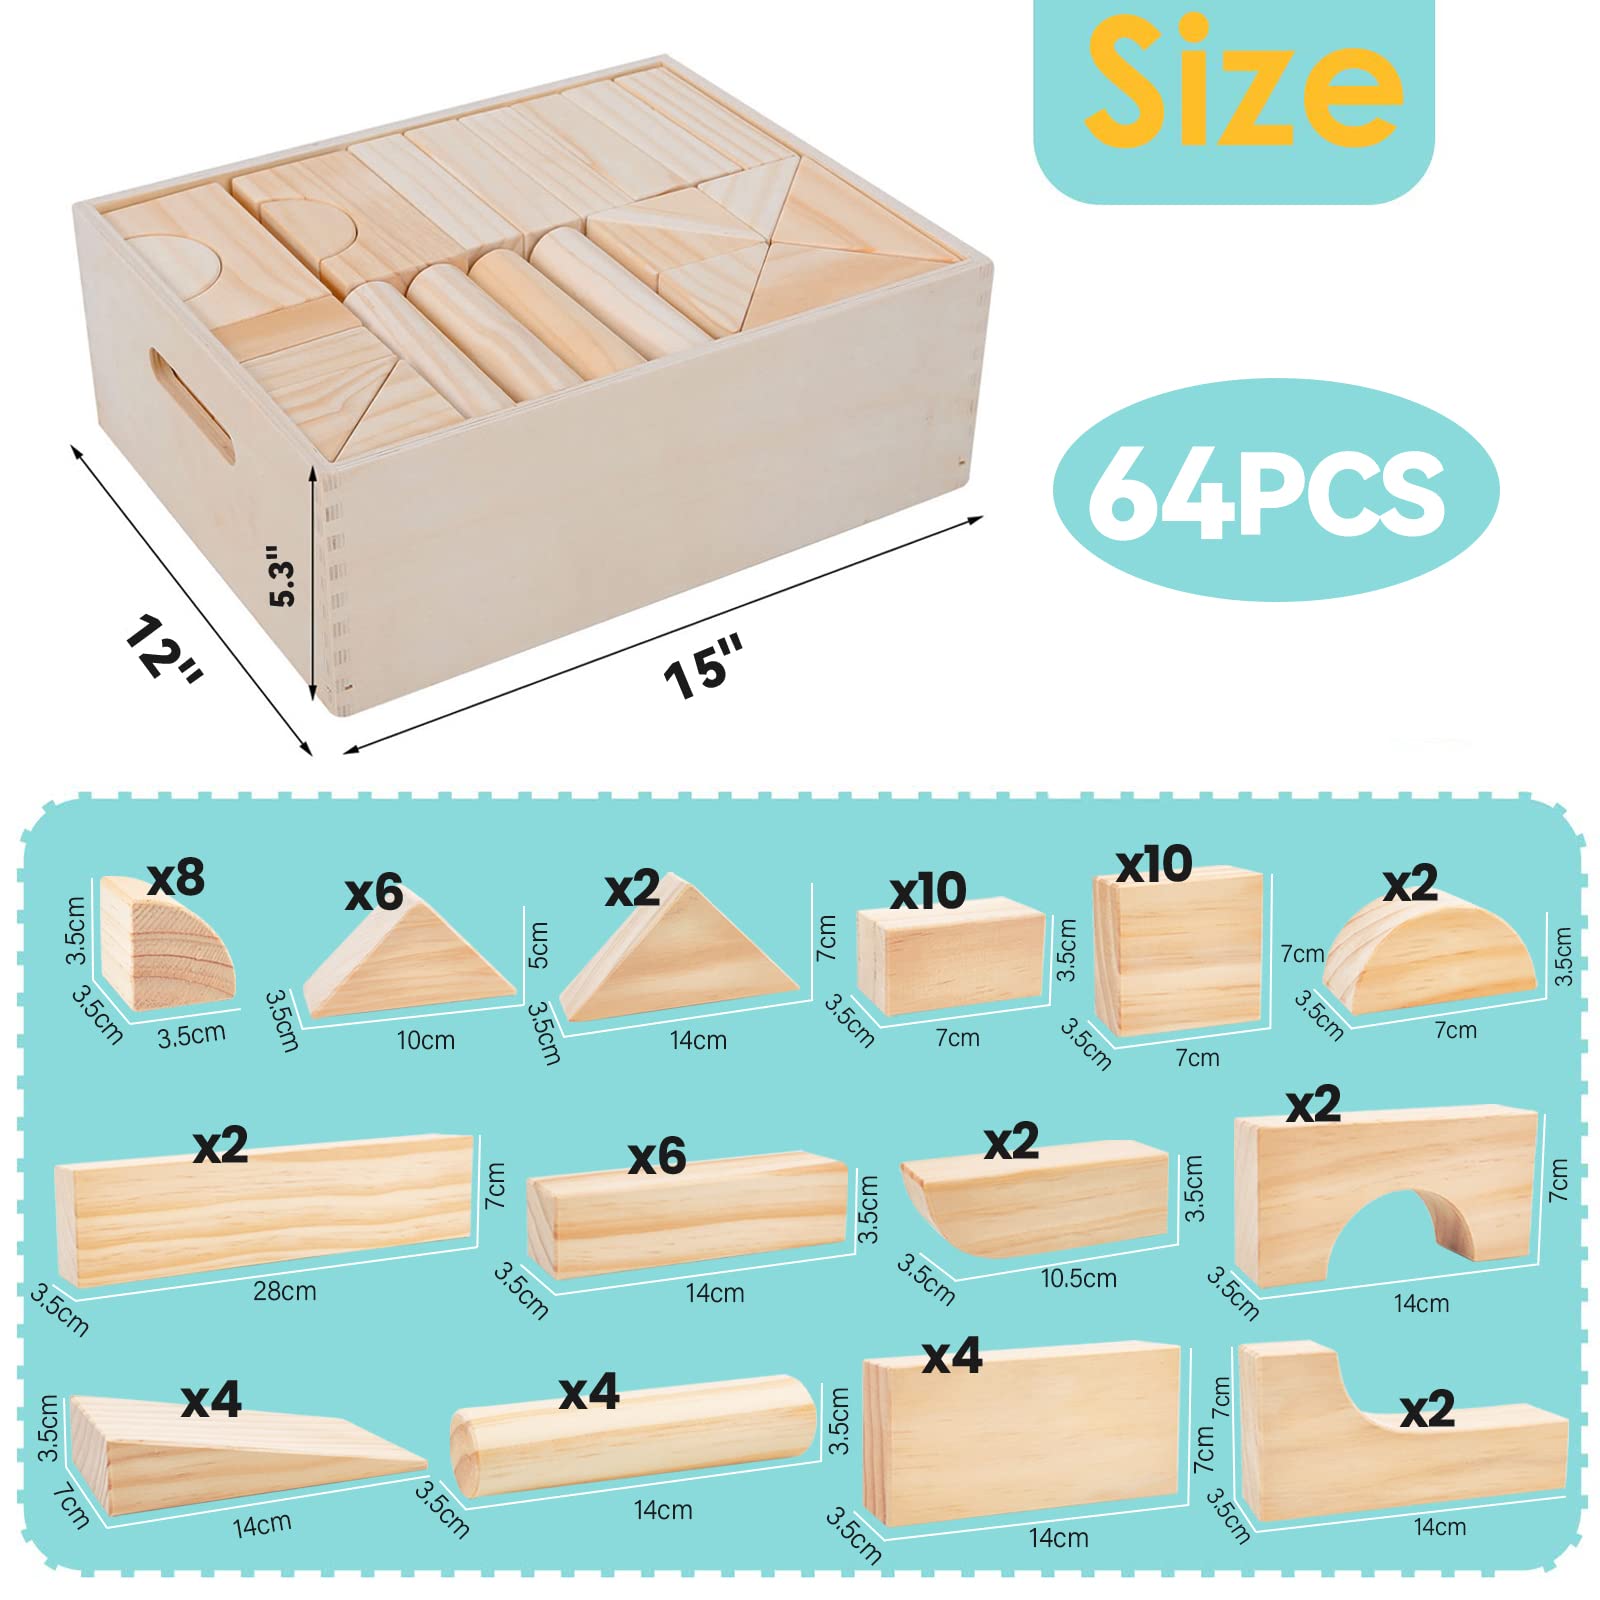 Onshine Large Wooden Blocks for Toddlers 1-3, 64 Pieces Big Wood Building Blocks Set with Wooden Storage Box, Large Toddler Blocks Building and Stacking Toys Construction Set